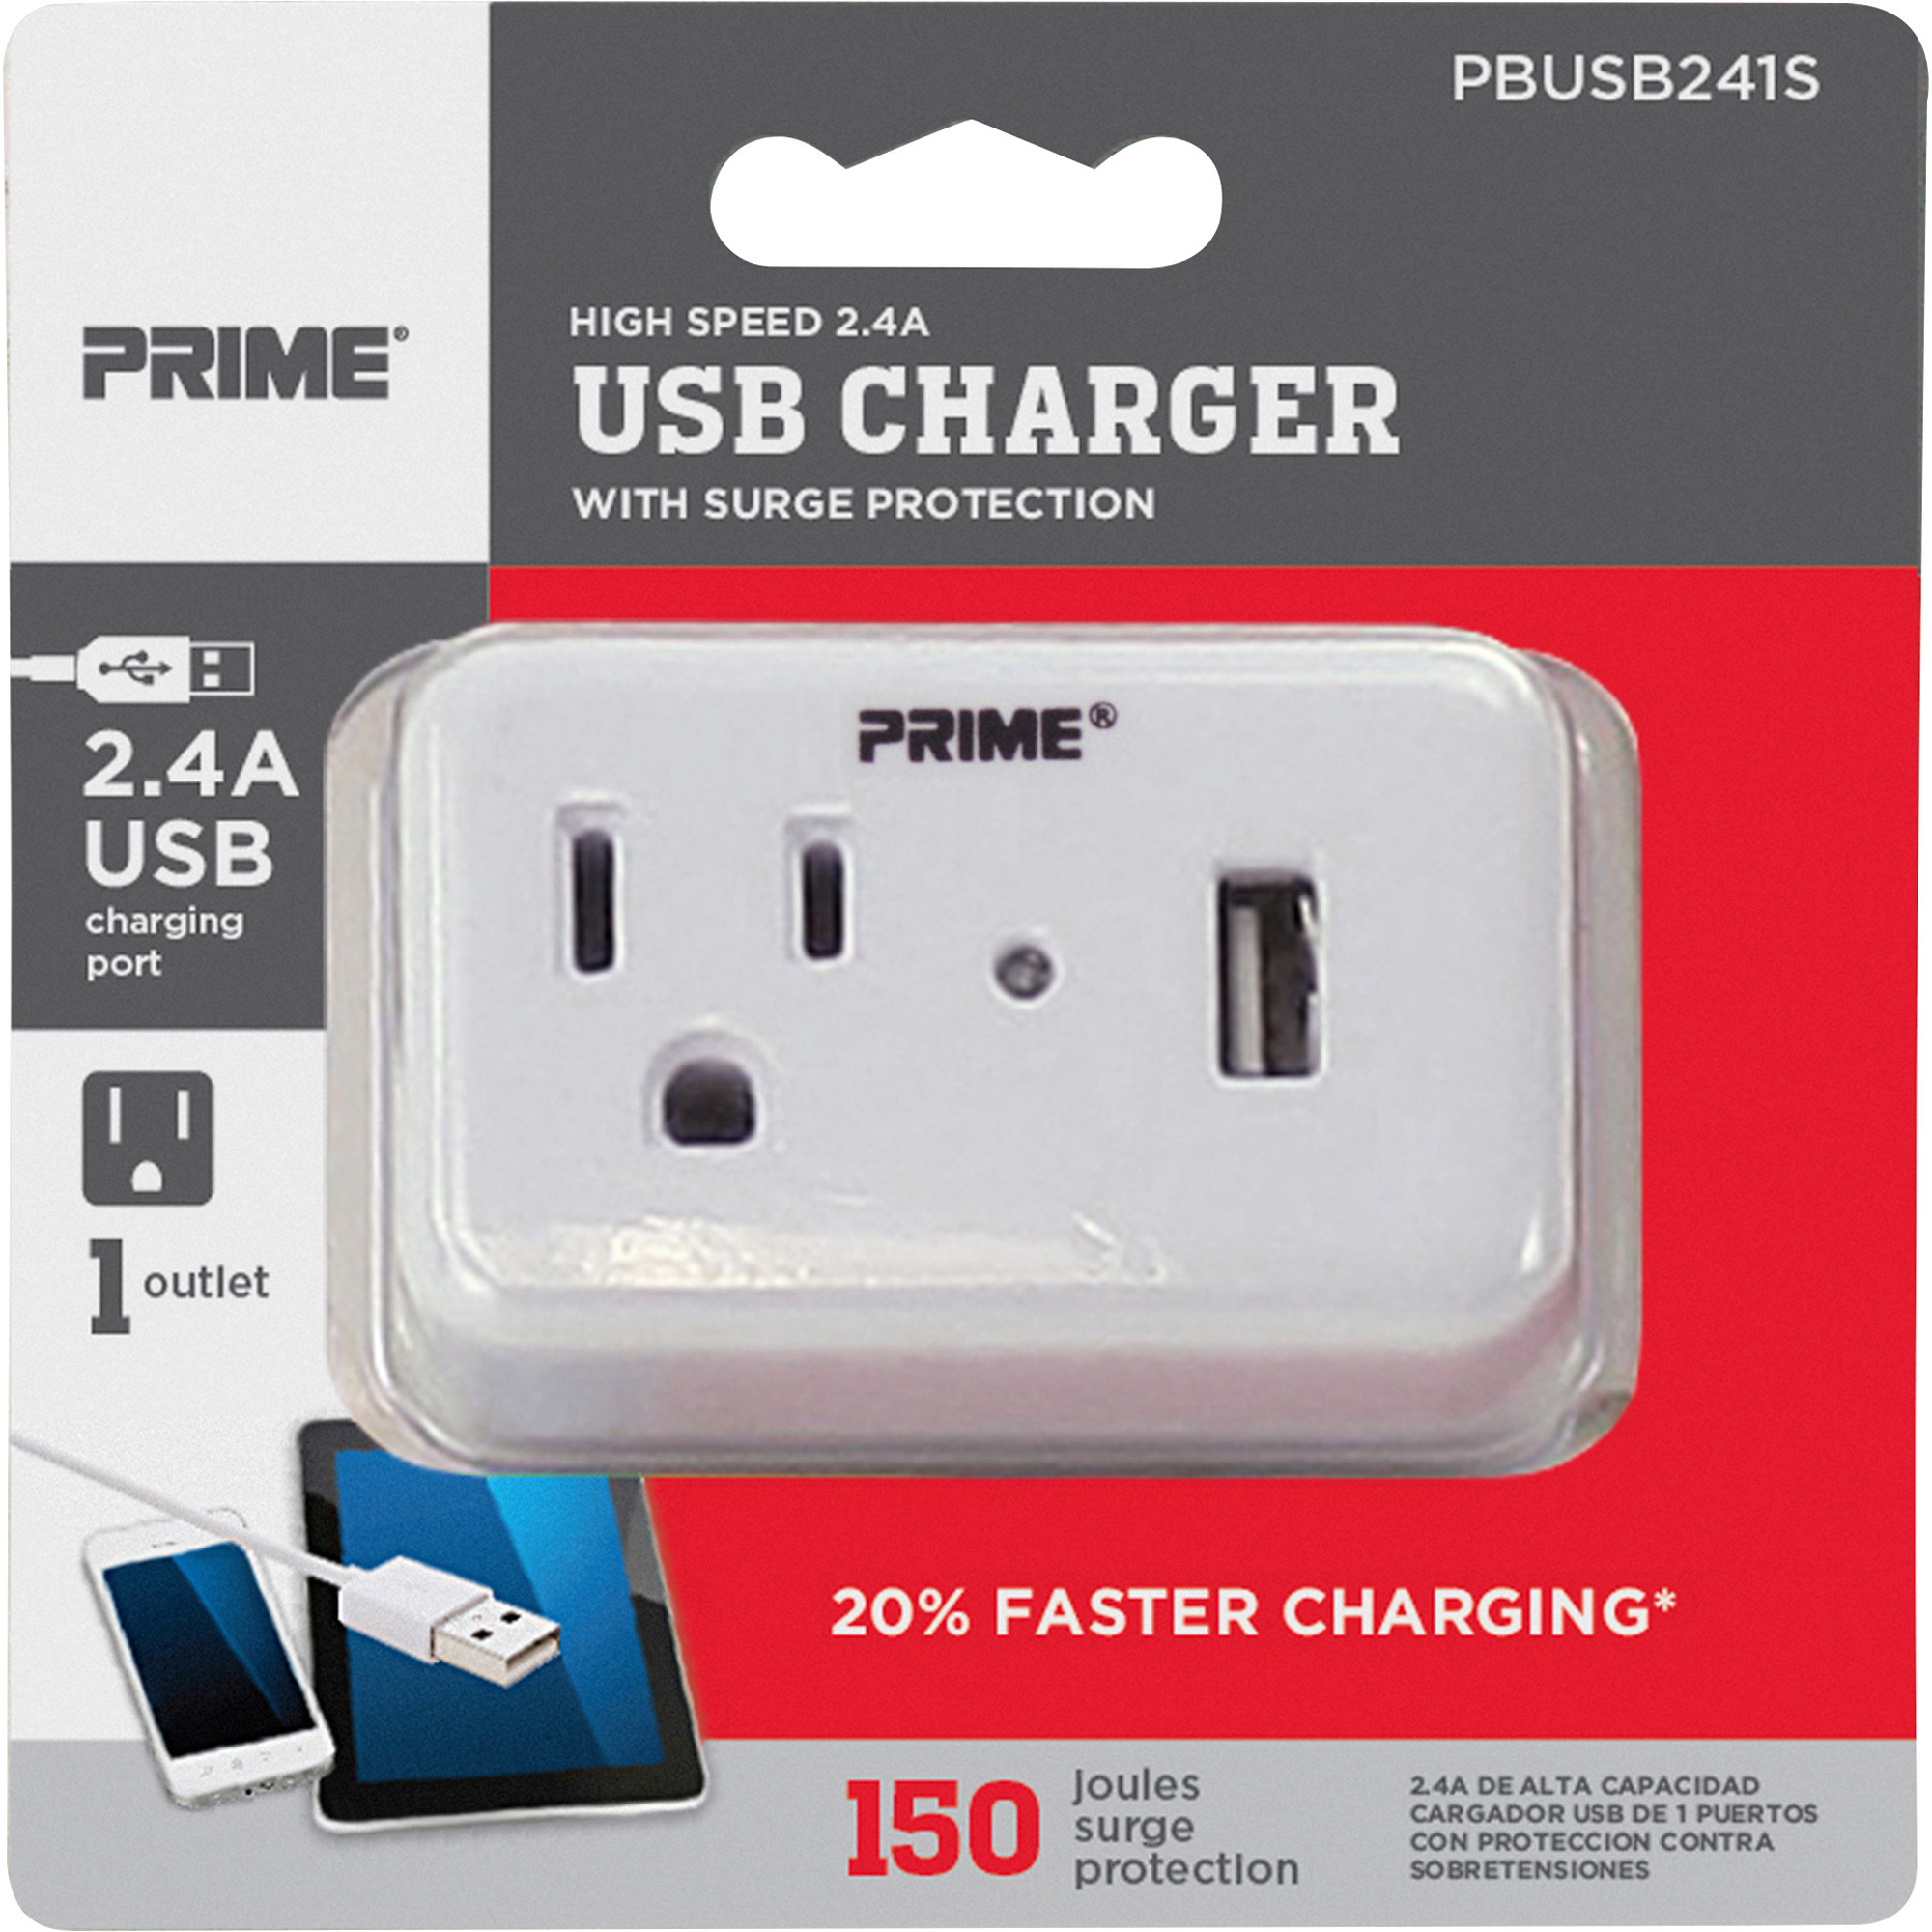 Prime Wire & Cable High-Speed USB Charger, 2.4 Amps, USB Port and AC Outlet, Model PBUSB241S